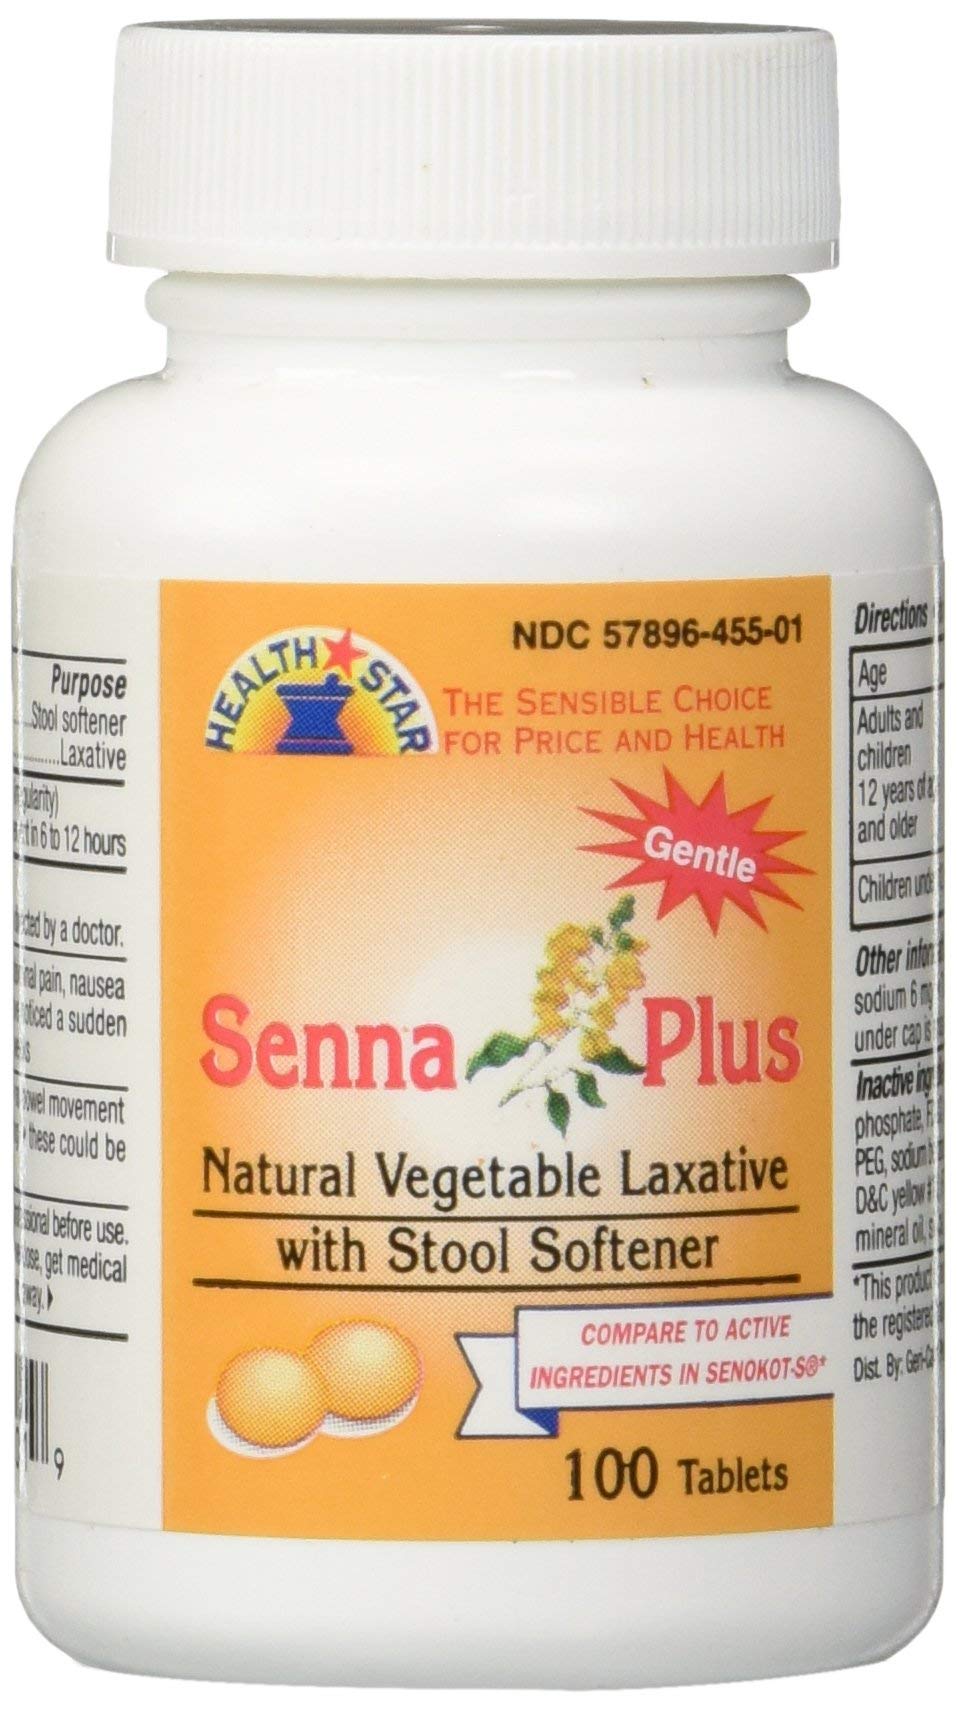 Senna Plus Natural Vegetable Laxative with Stool Softener - 100 Tablets